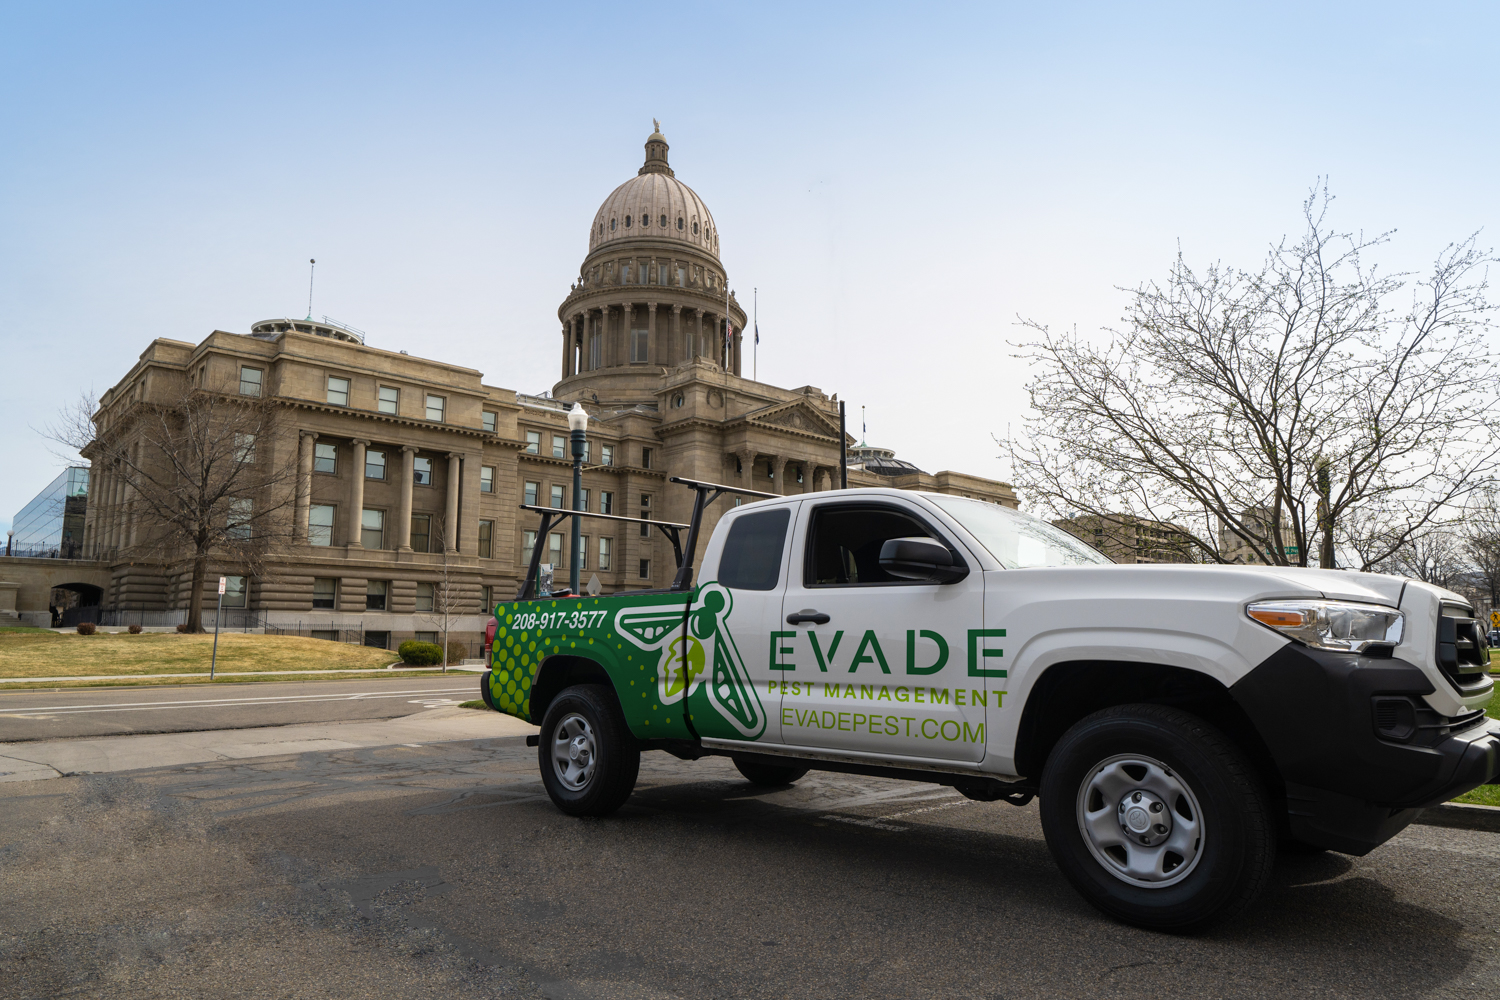 Evade Pest Management Truck in front of Boise Capital Building